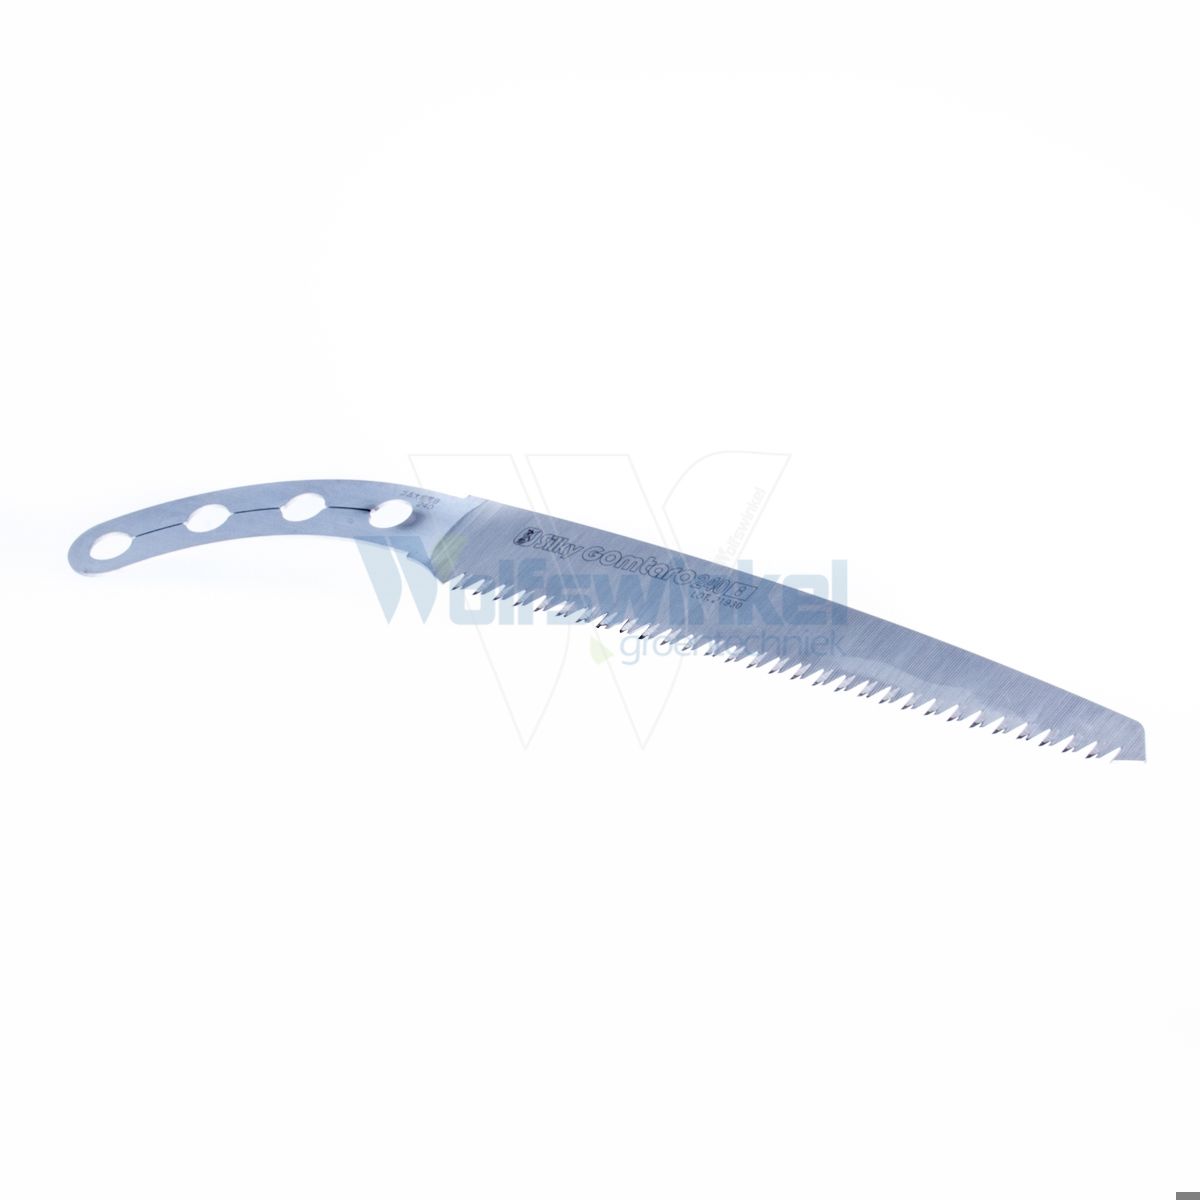 Silky replacement blade gomtaro 240-8